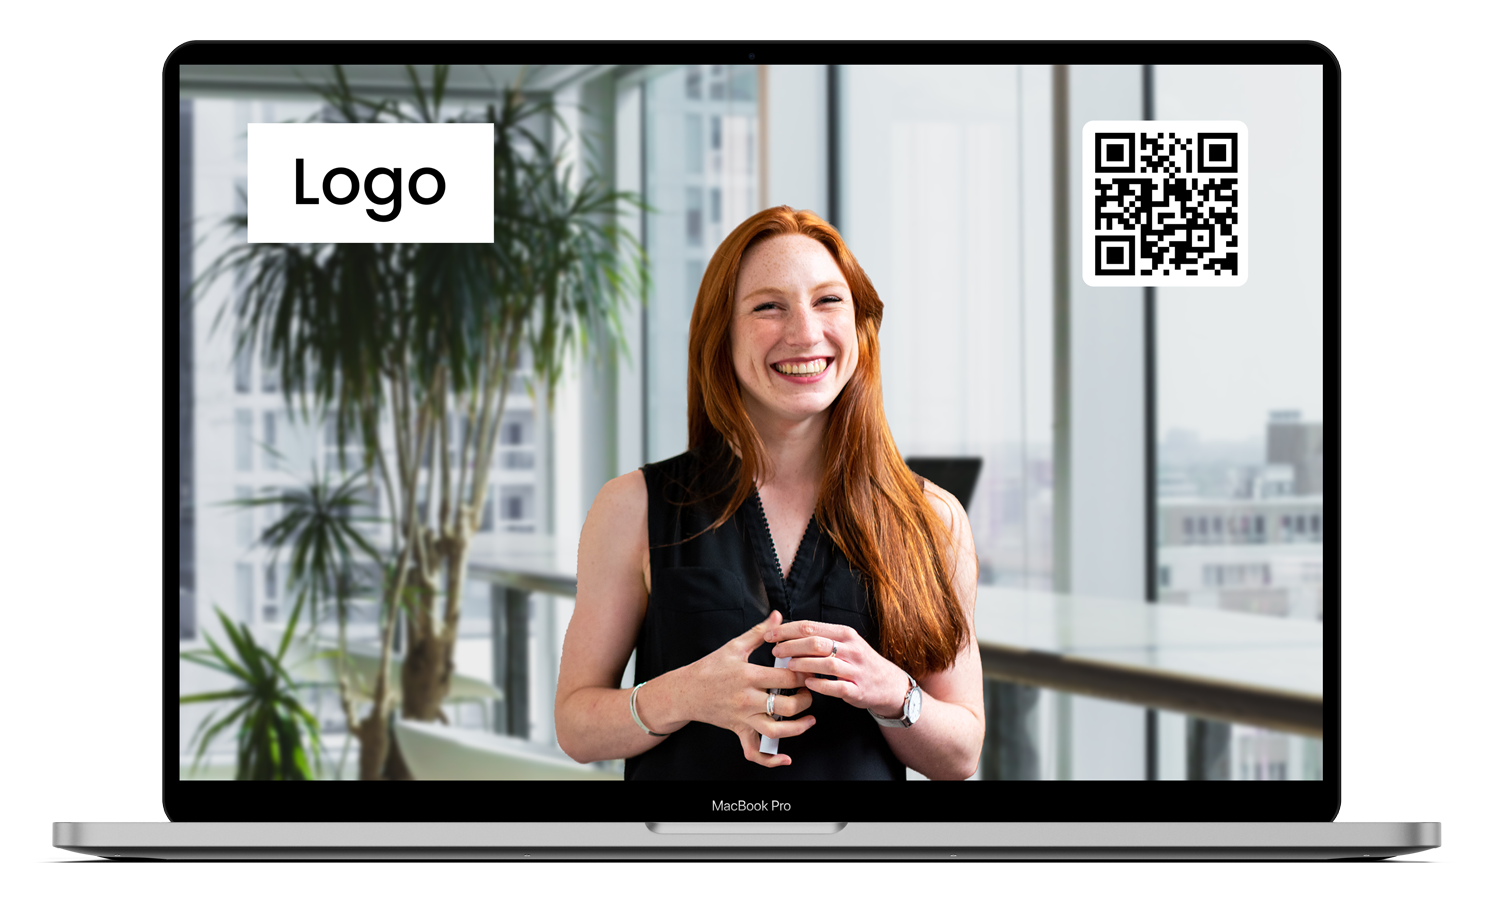 The digital business card: Link website, social media profiles and more